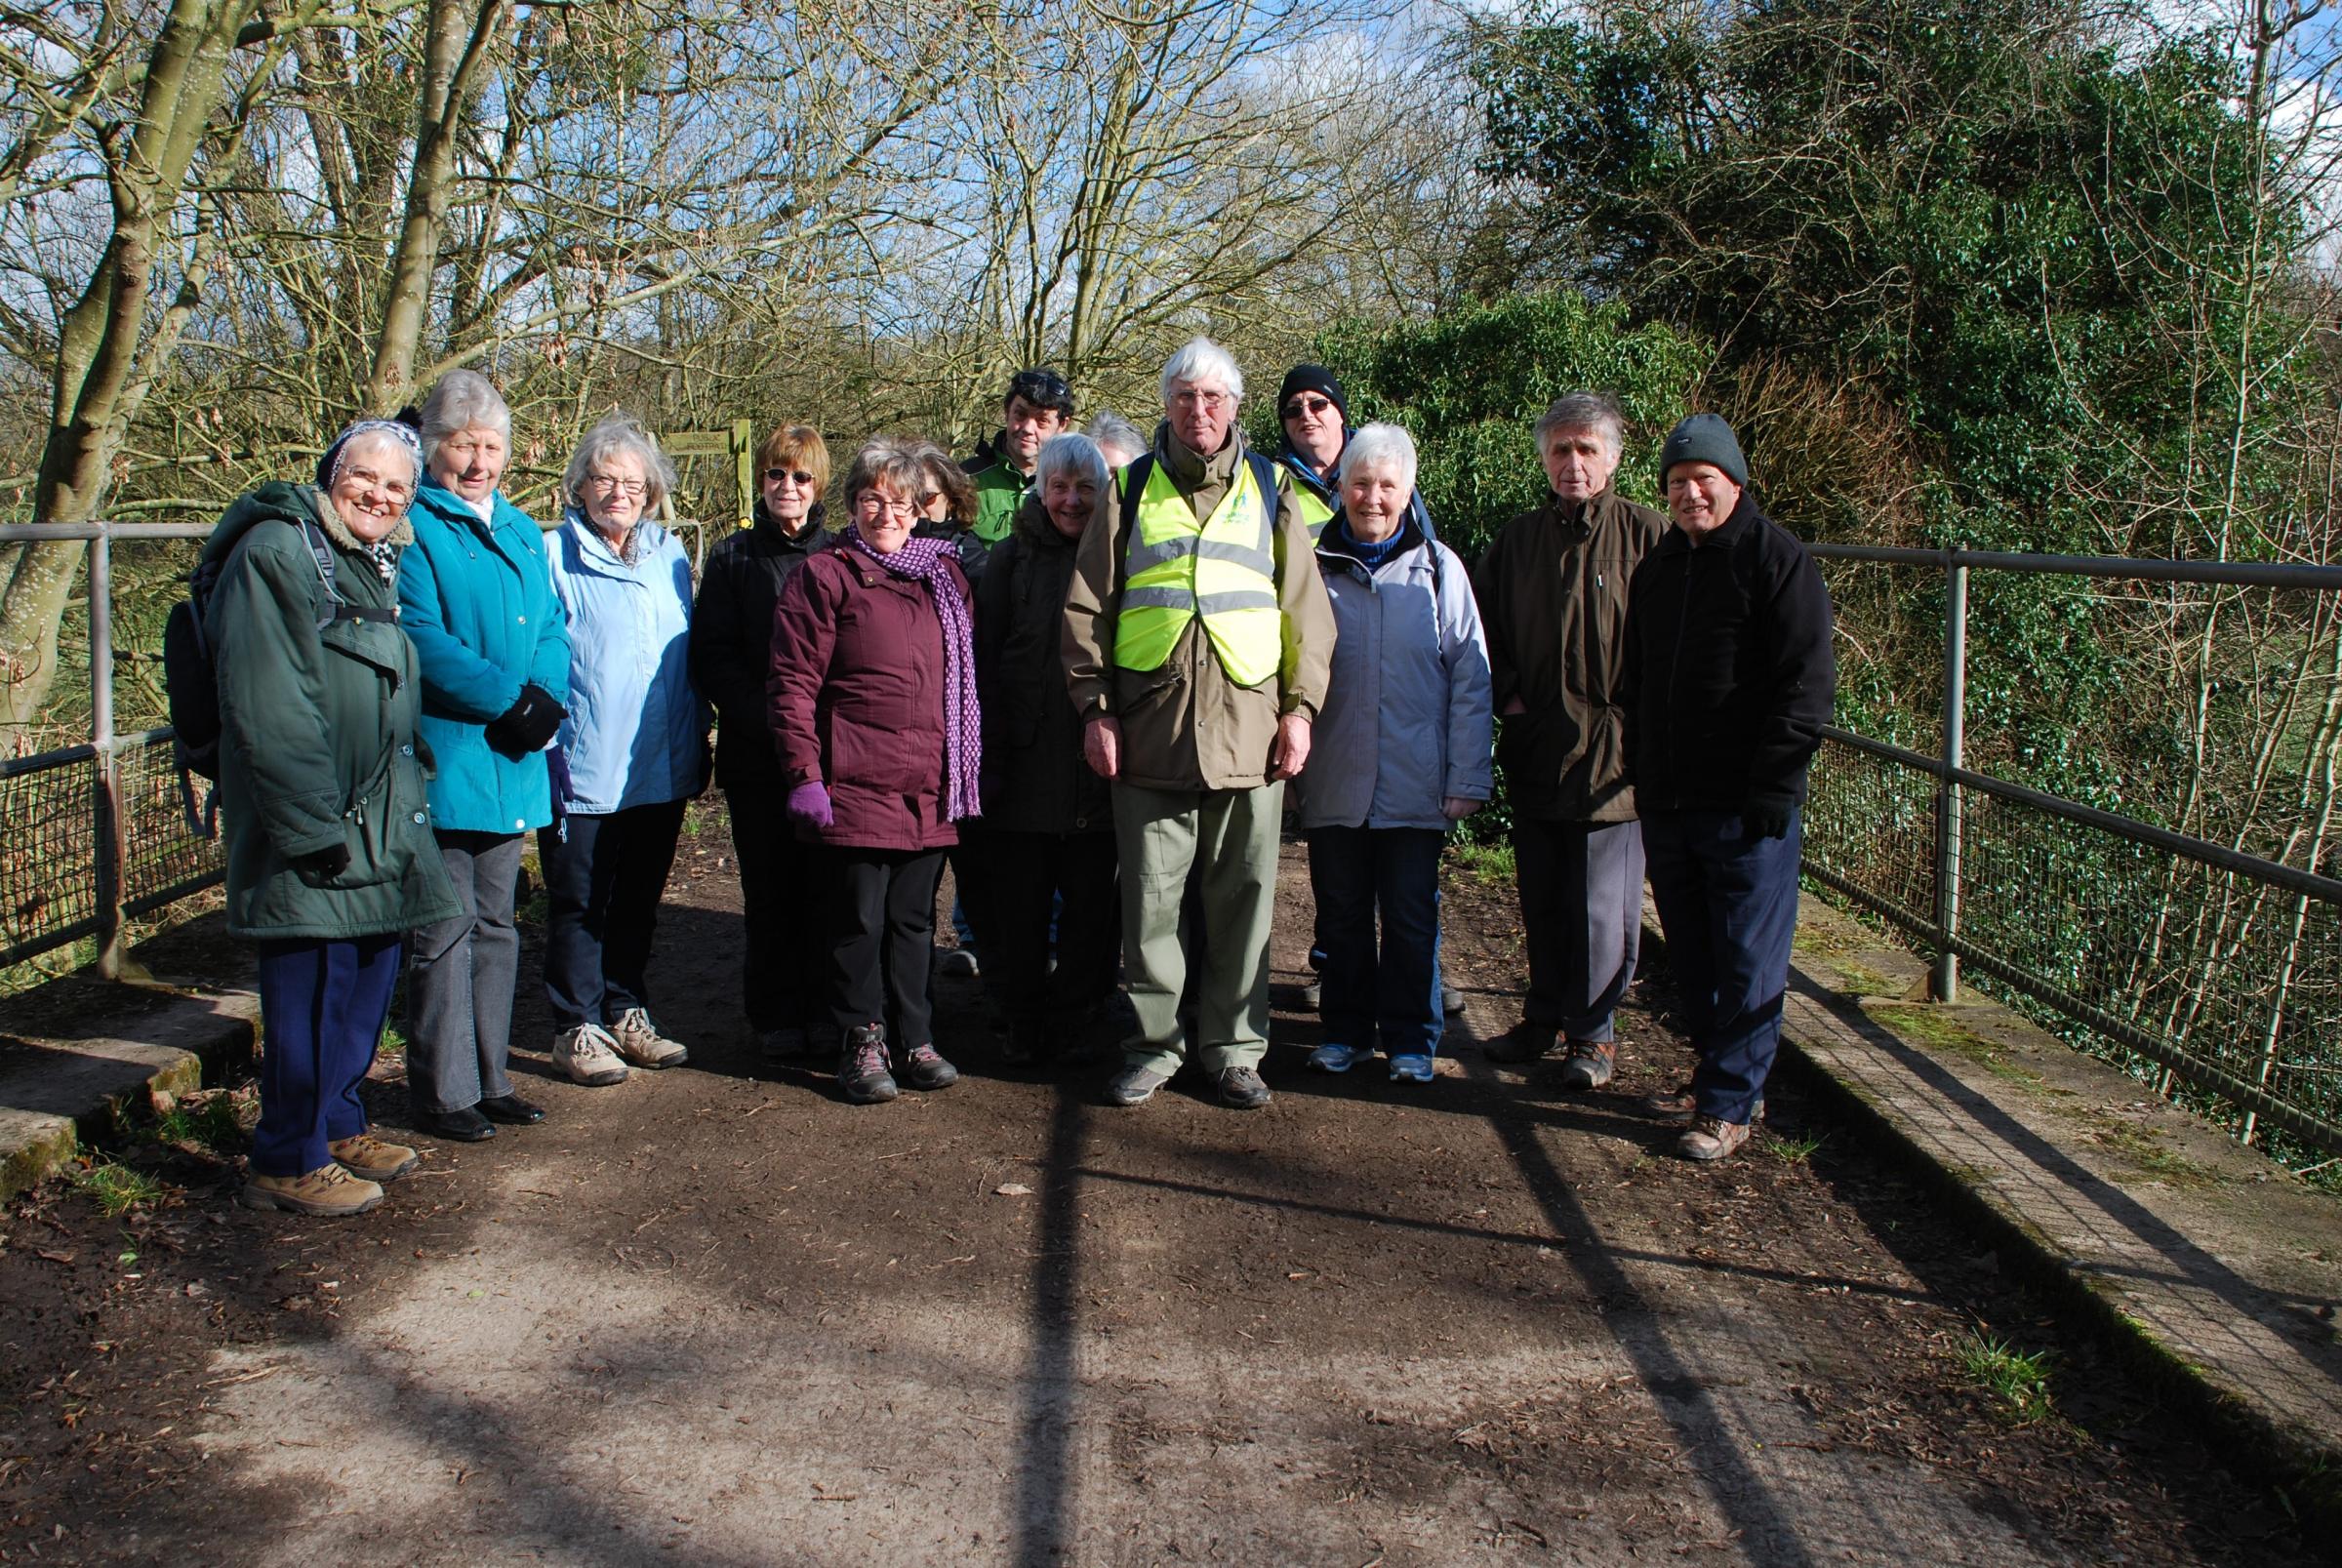 Leominster walking group ‘striding ahead’ with plans to make walking activities key part of town’s appeal